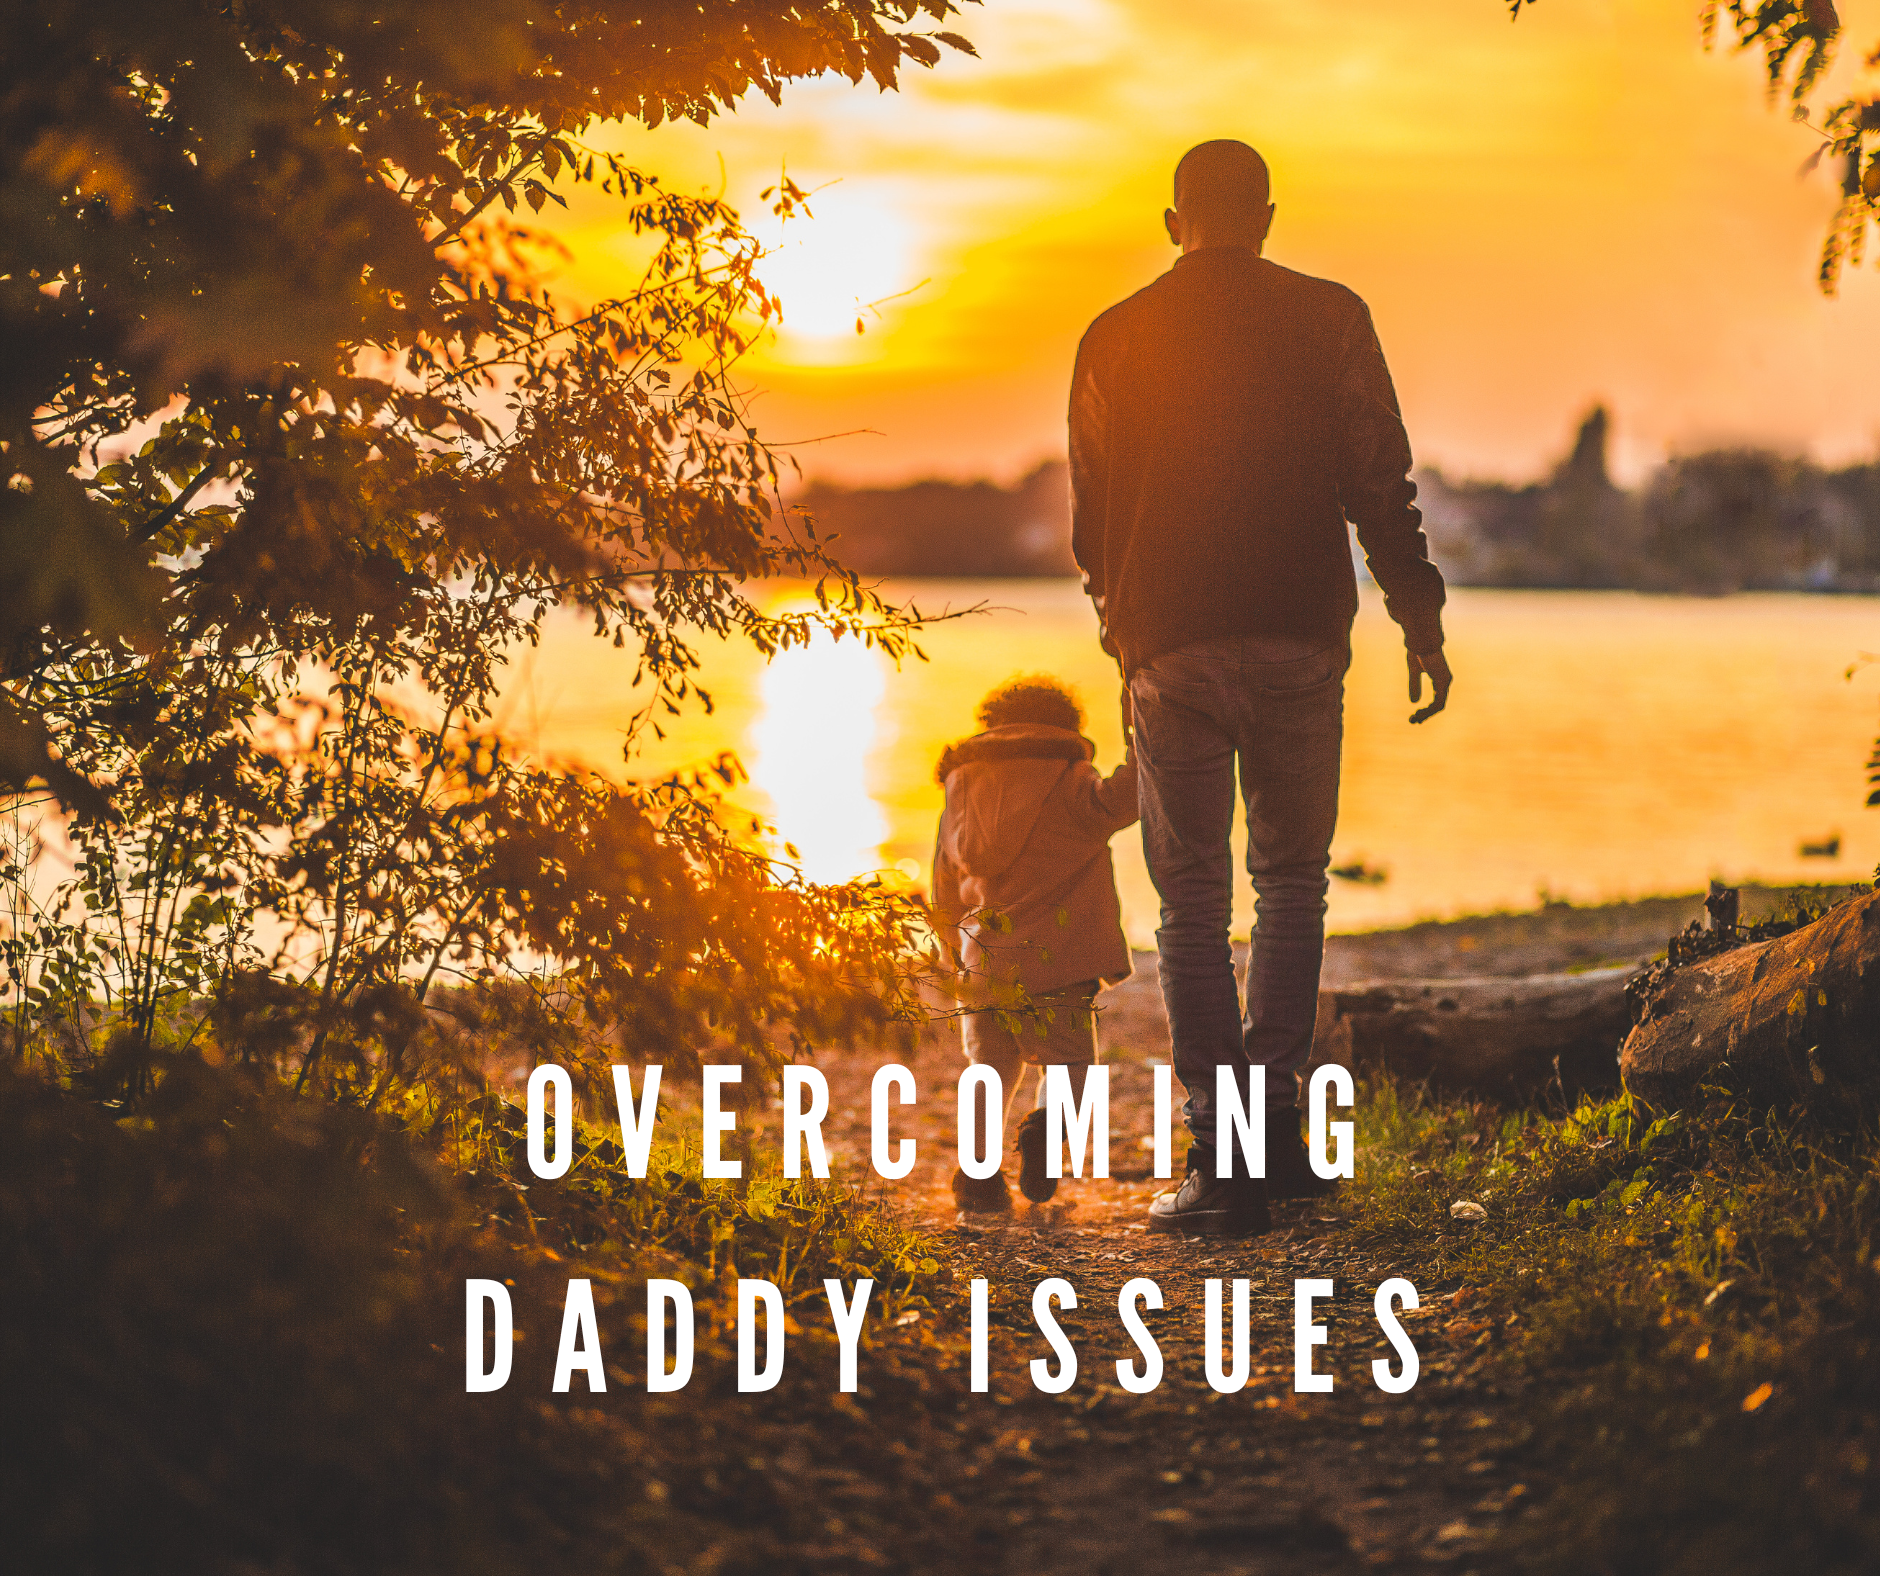 Overcoming Daddy Issues